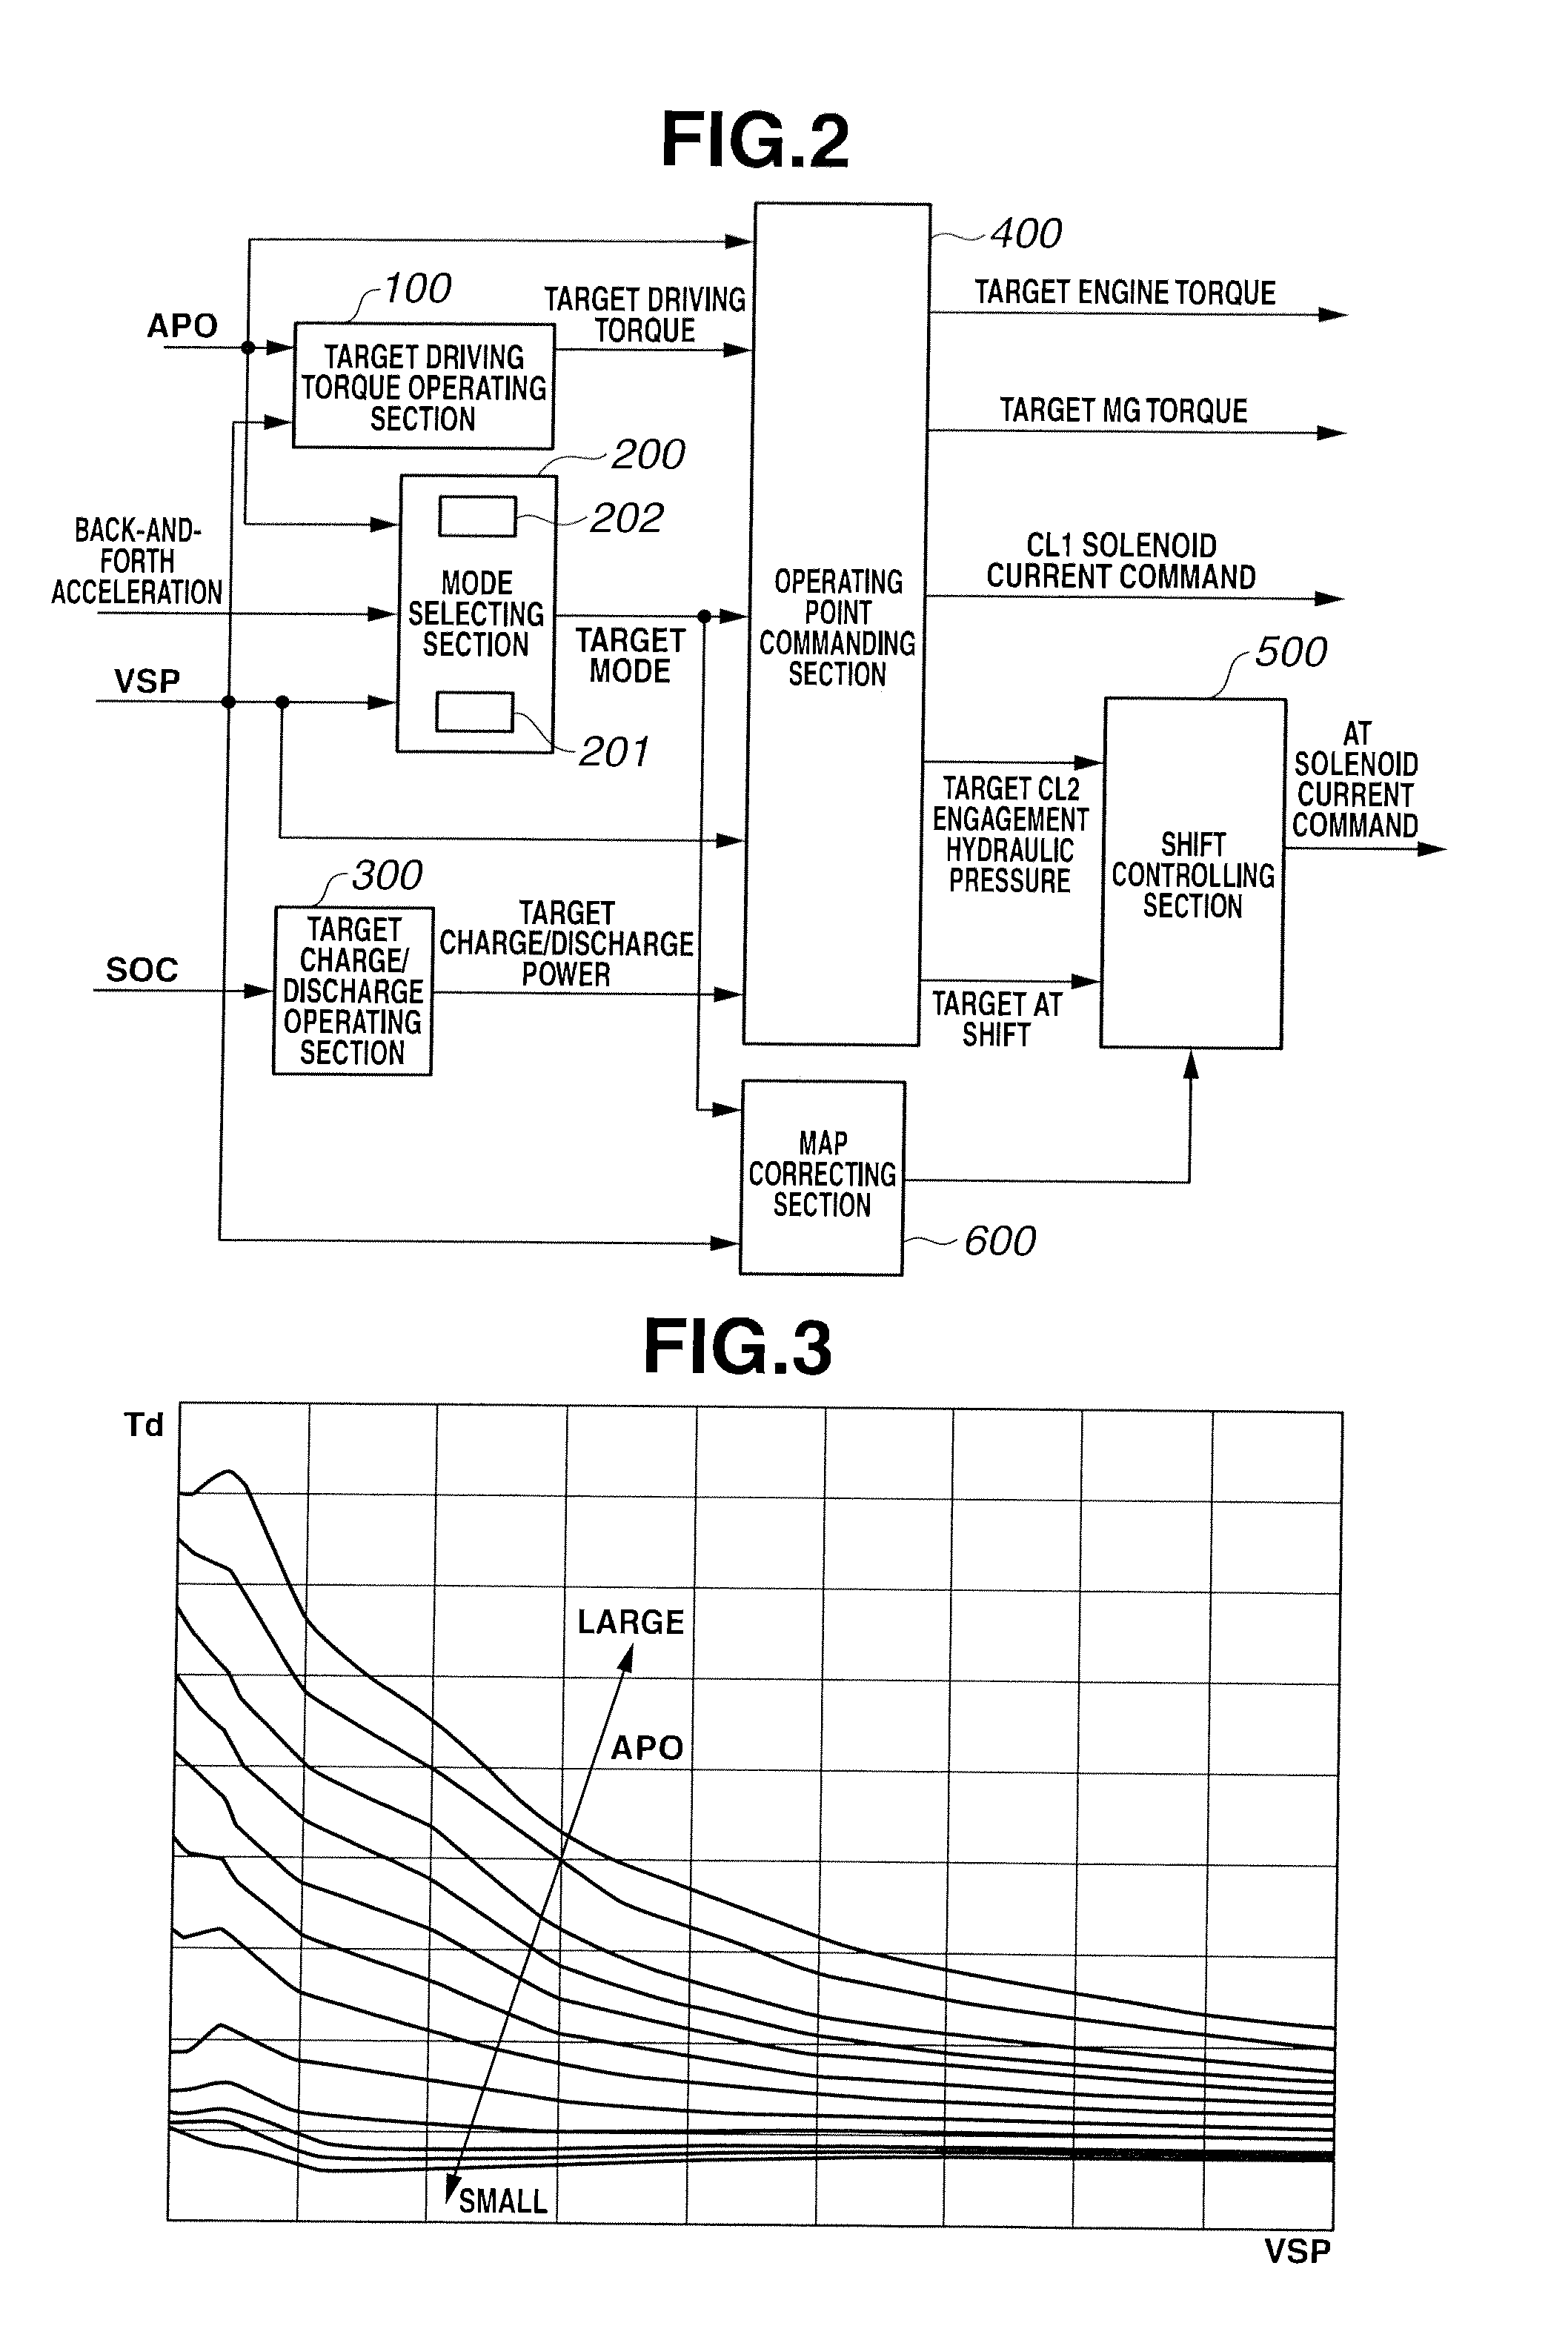 Hydraulic control apparatus for vehicle